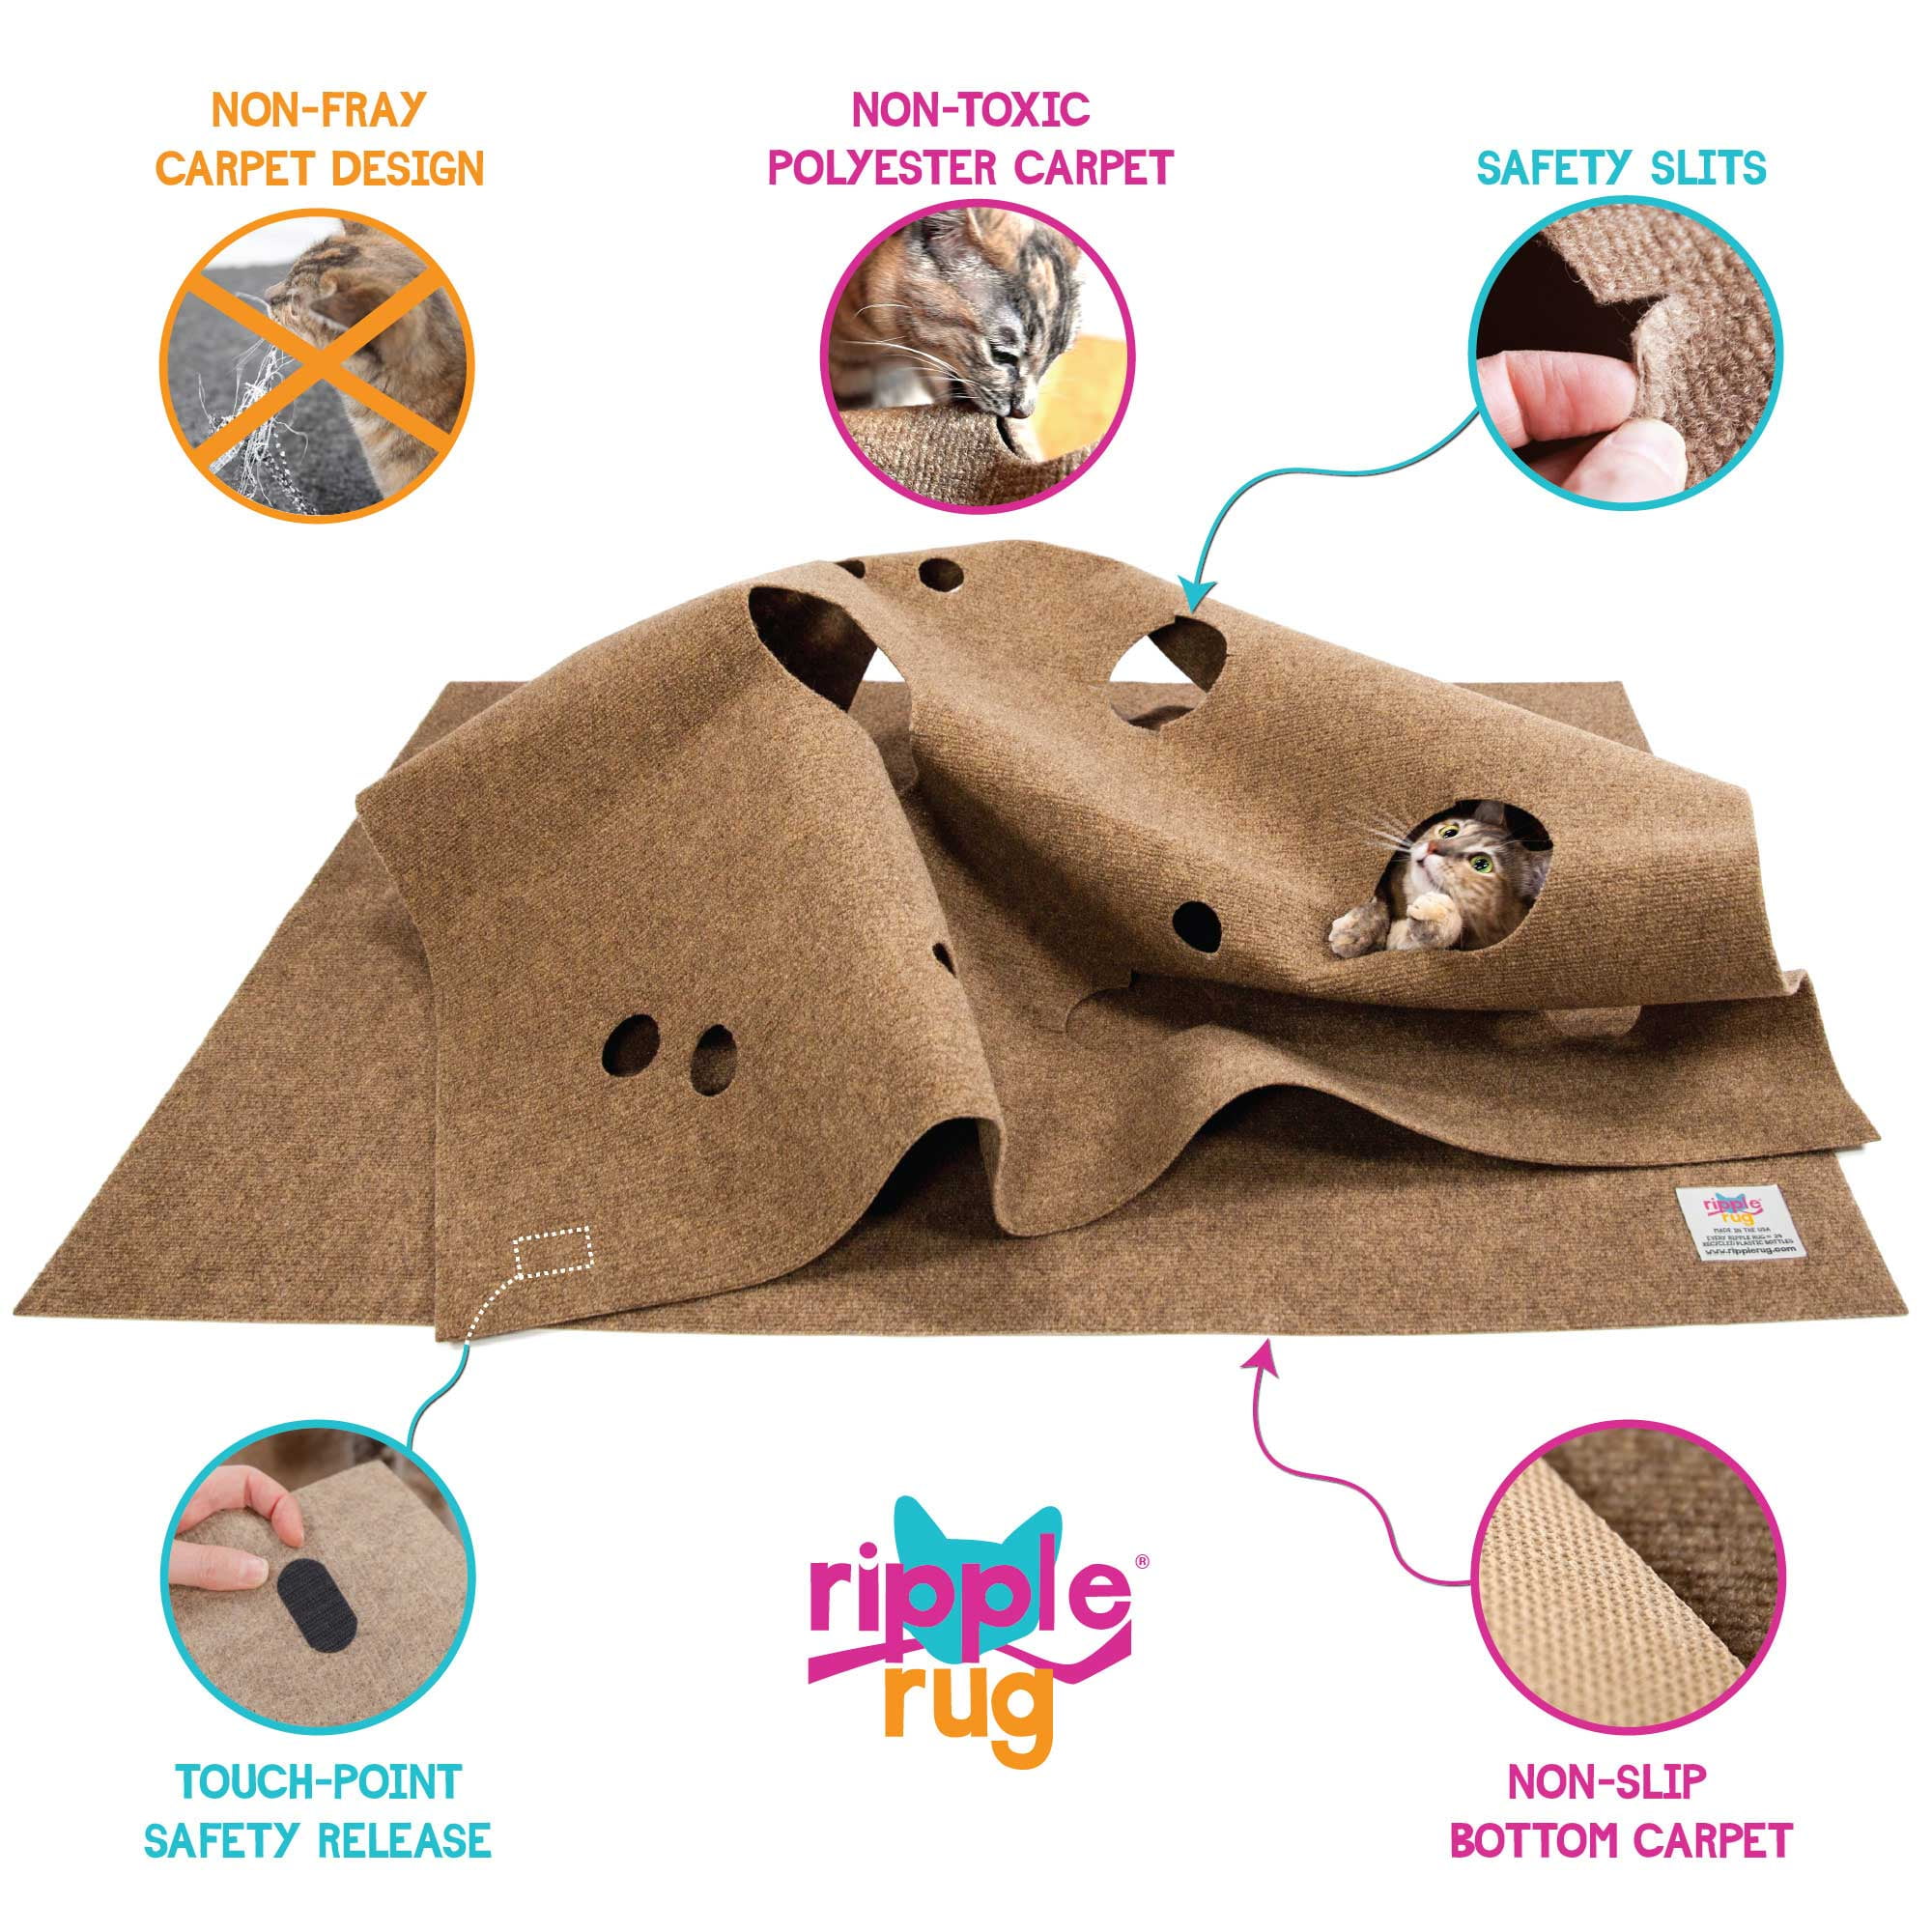 Cat Play Mat, Cat Activity Play Mat, Collapsible Pet Rug with Heart-shaped  and Square Holes, Interactive Cat Activity Rug for Small or Large Cats